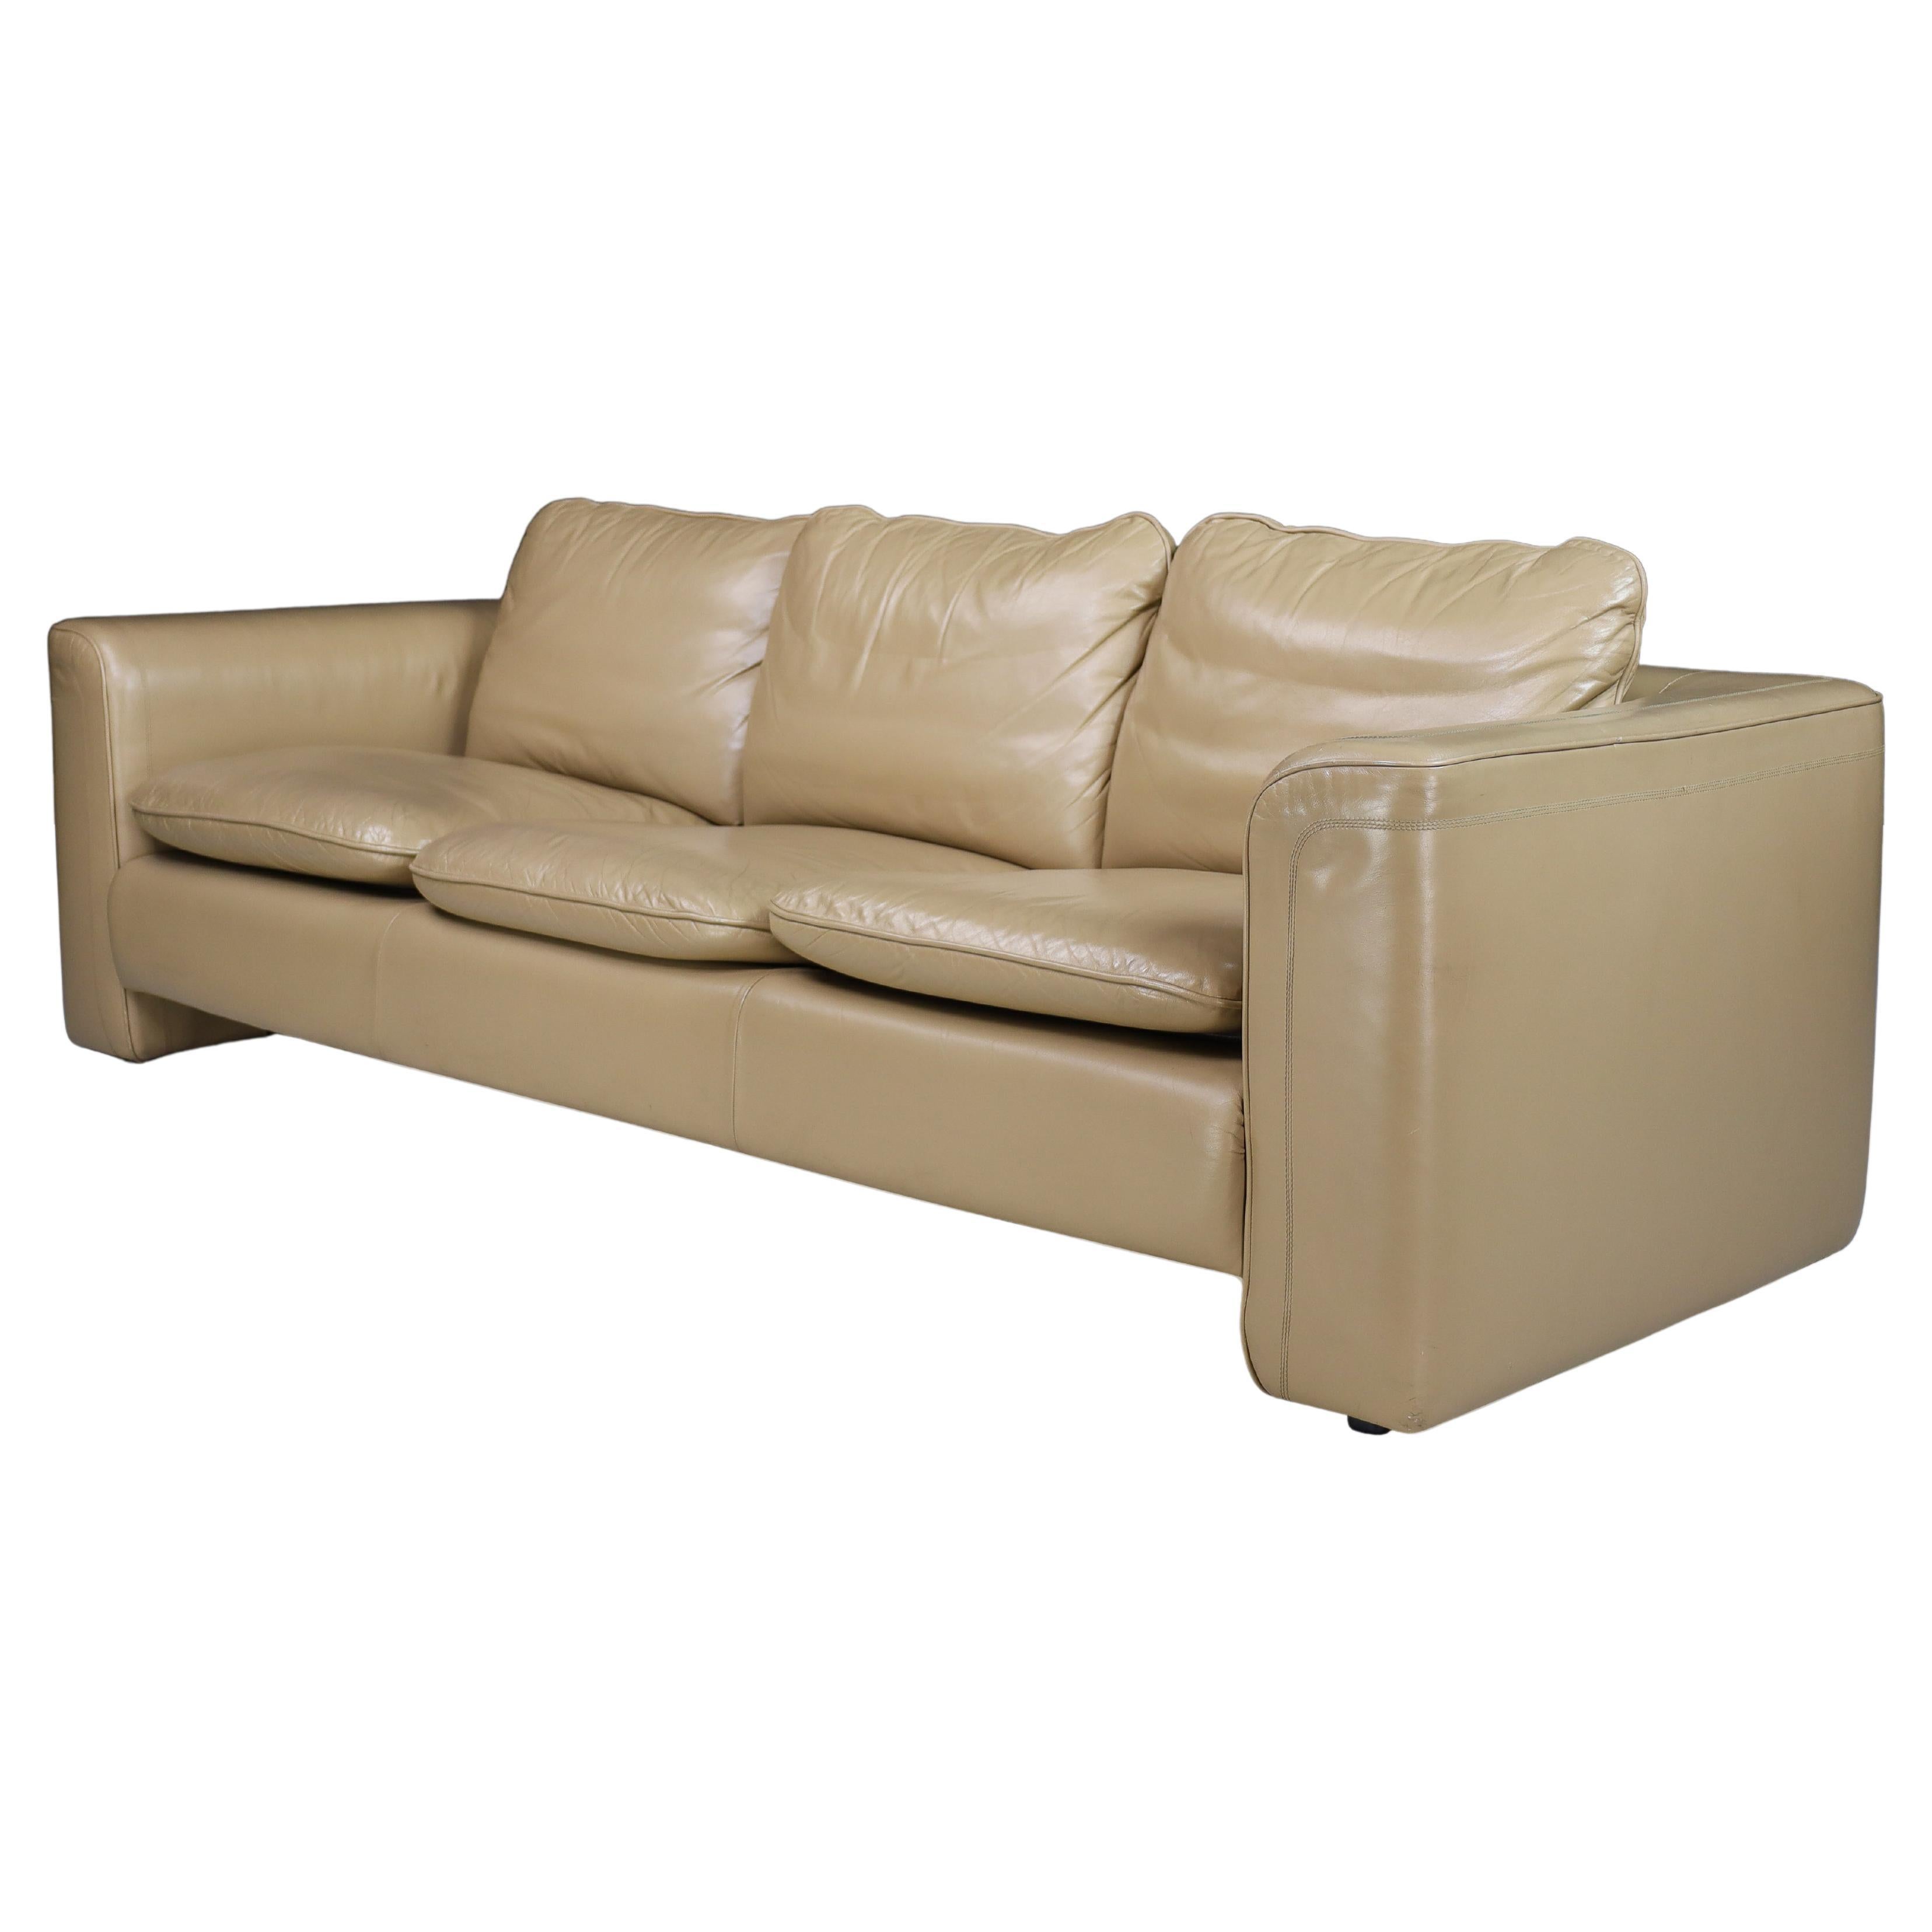 De Sede Ds 98 Leather Three-Seater Sofa, Switzerland, 1980 For Sale